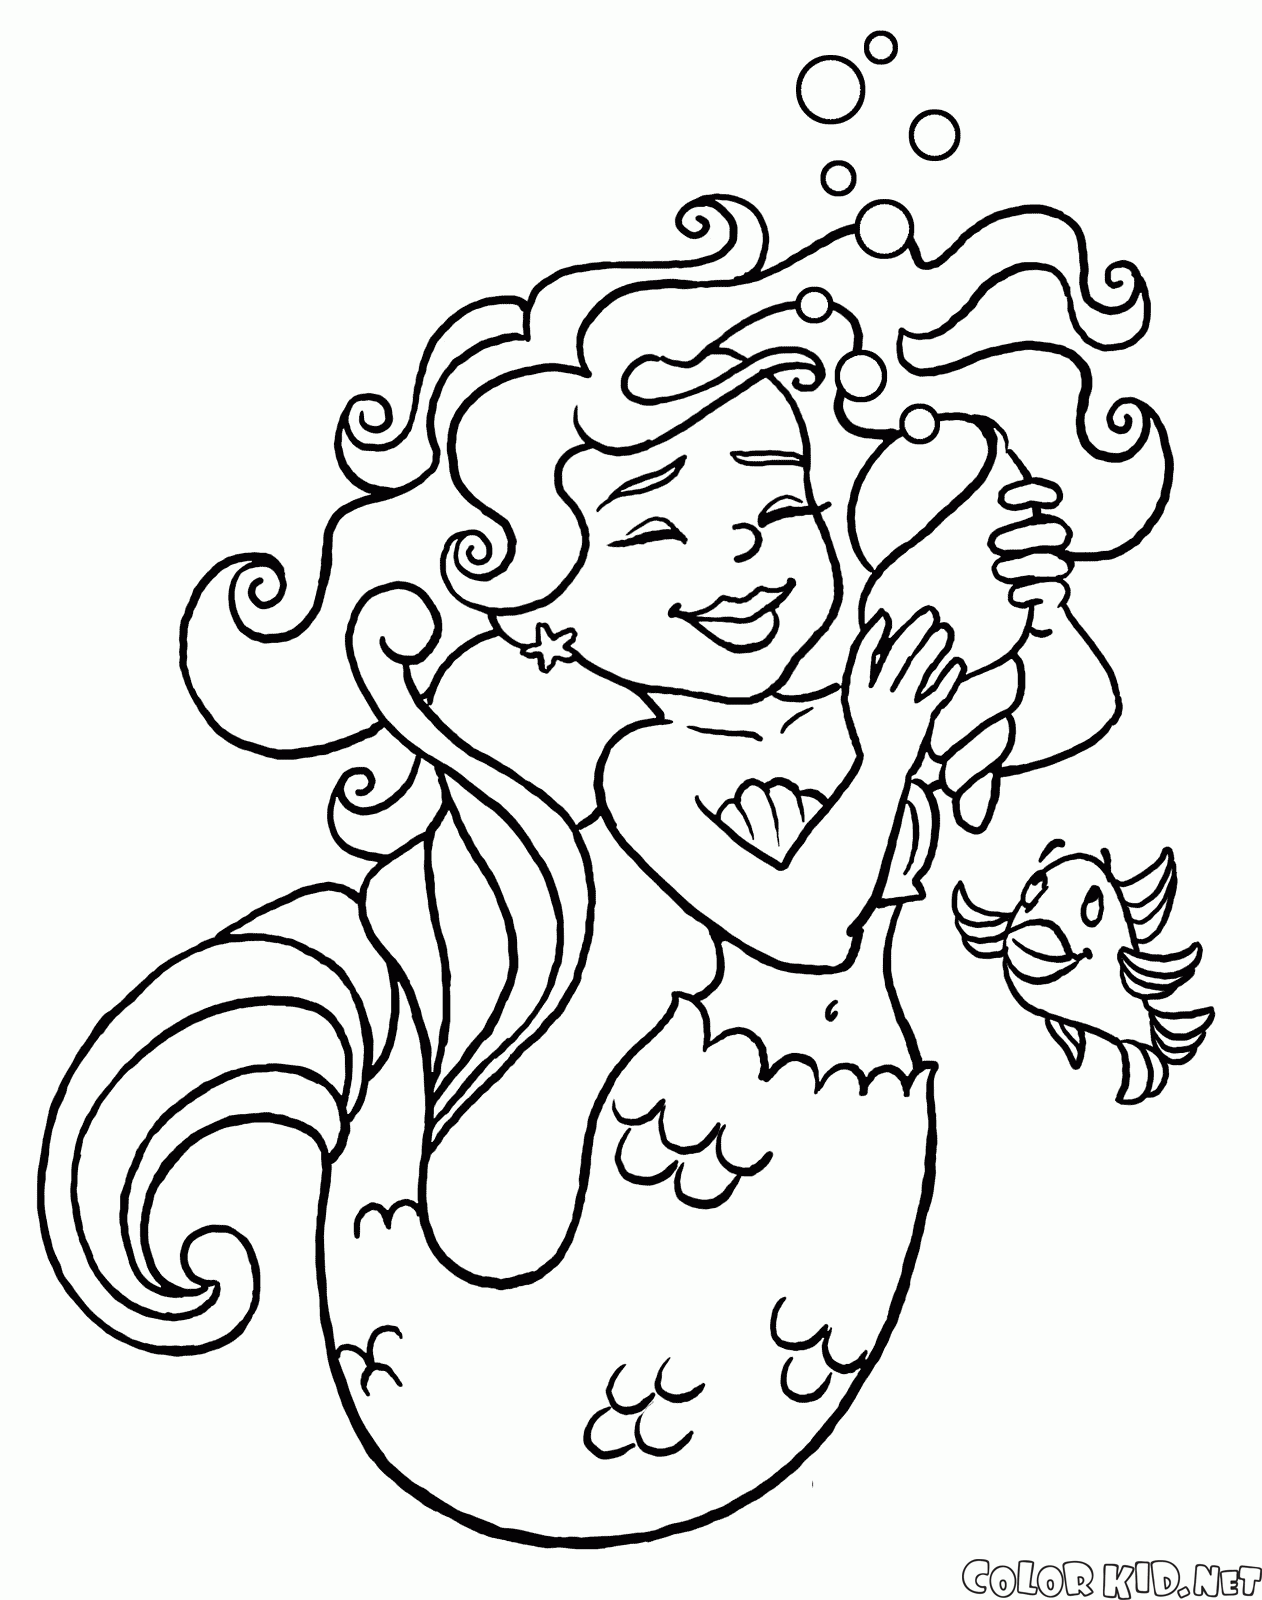 Mermaid with conch